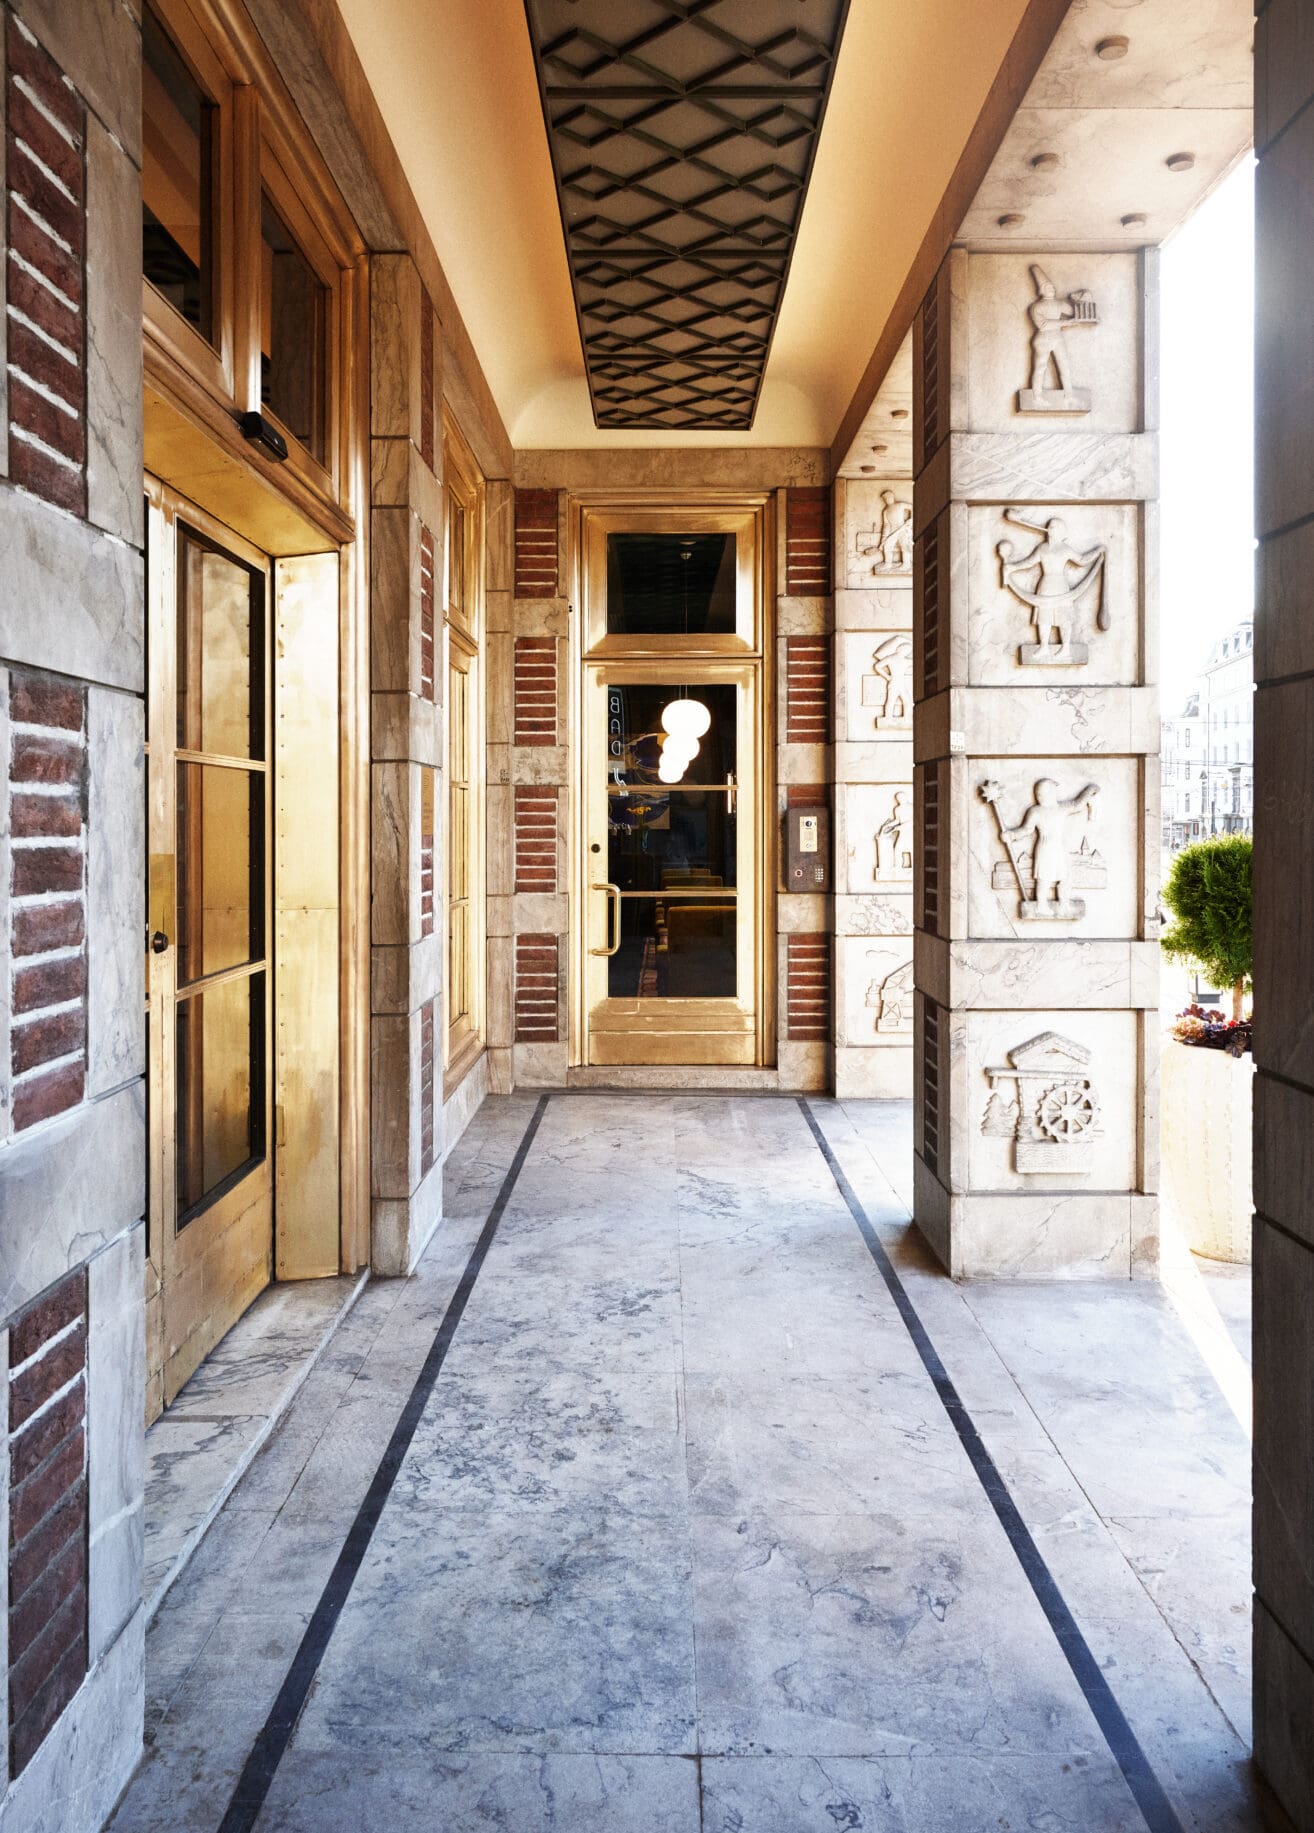 The entrance to Sommerro, a luxury hotel in Oslo | intricate stonework and an opulent gilded door